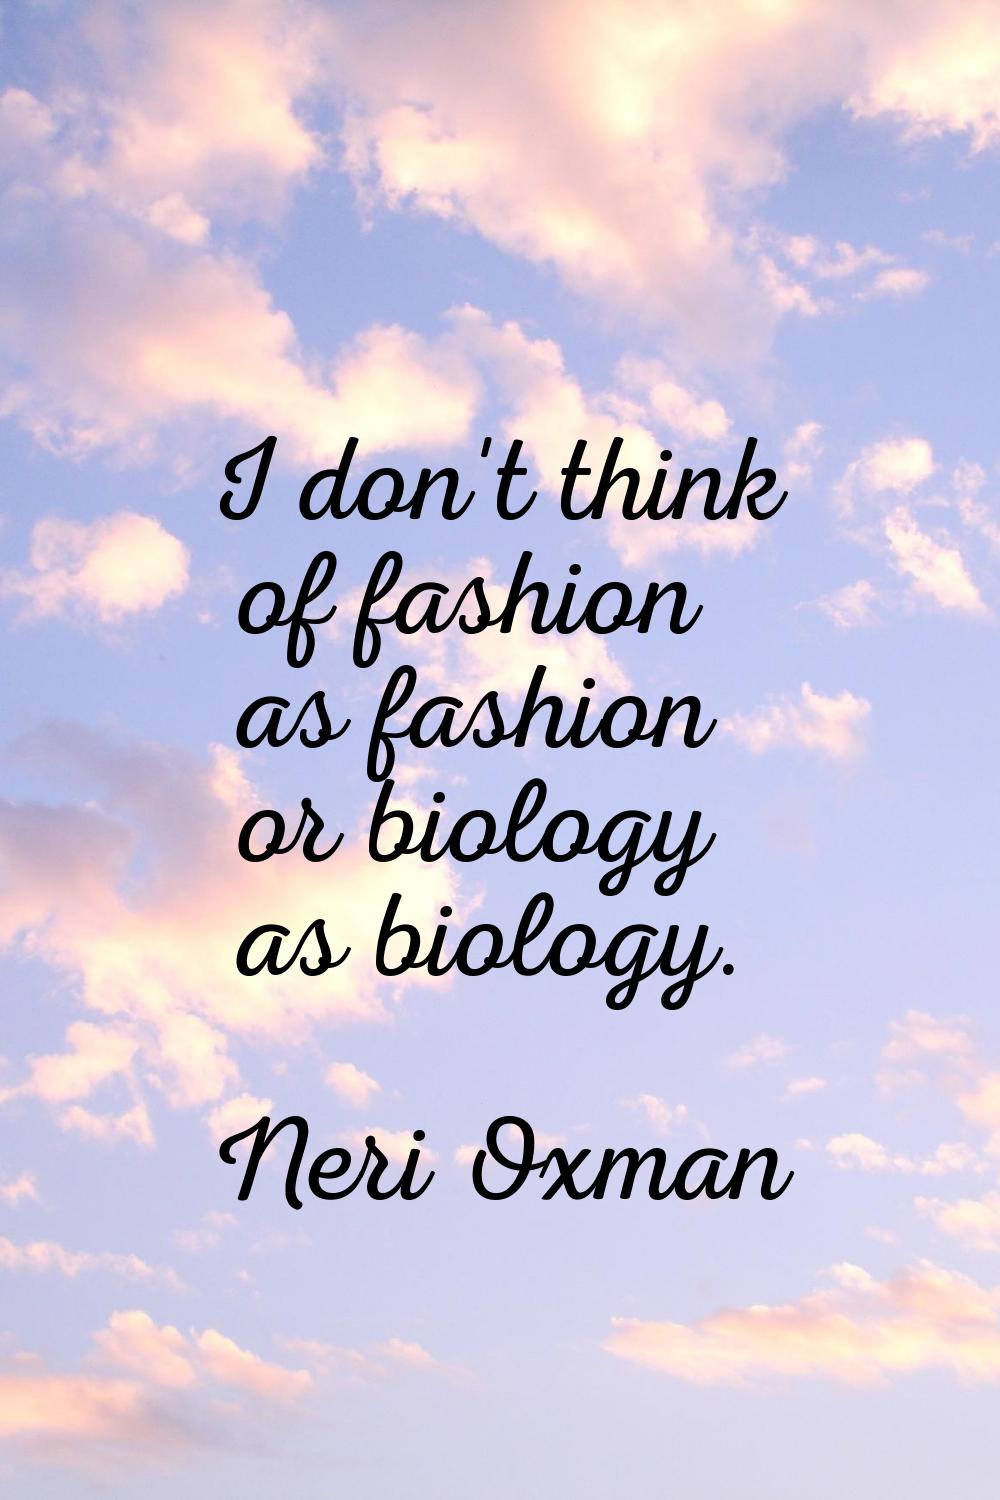 I don't think of fashion as fashion or biology as biology.